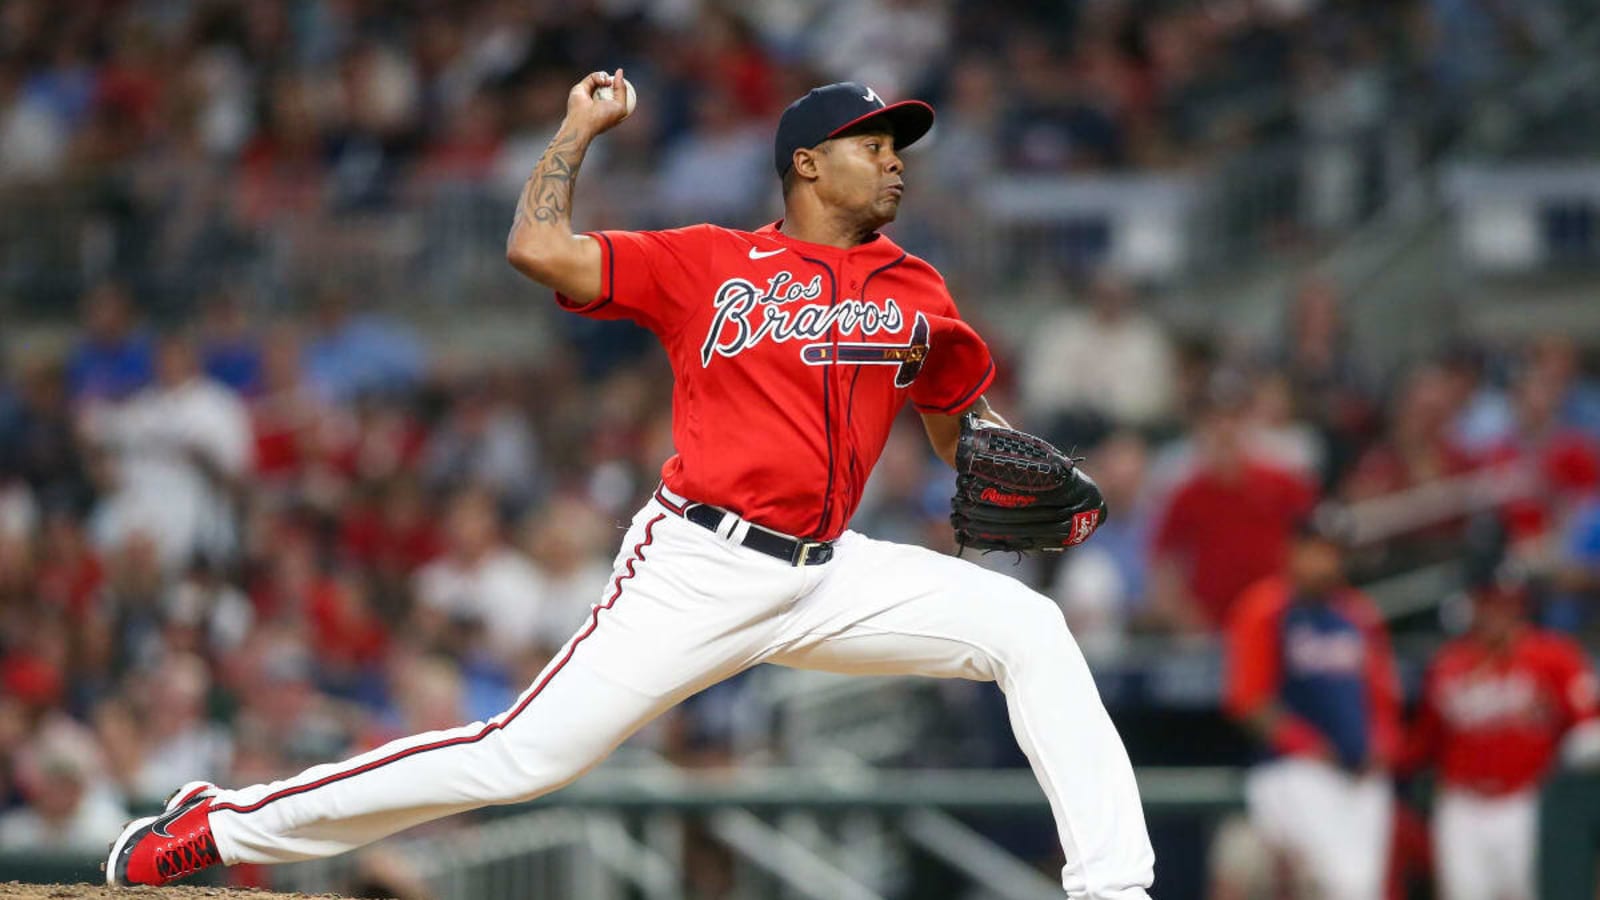 Takeaways: The Braves dropped the series opener 6-5 to the Tigers in extras